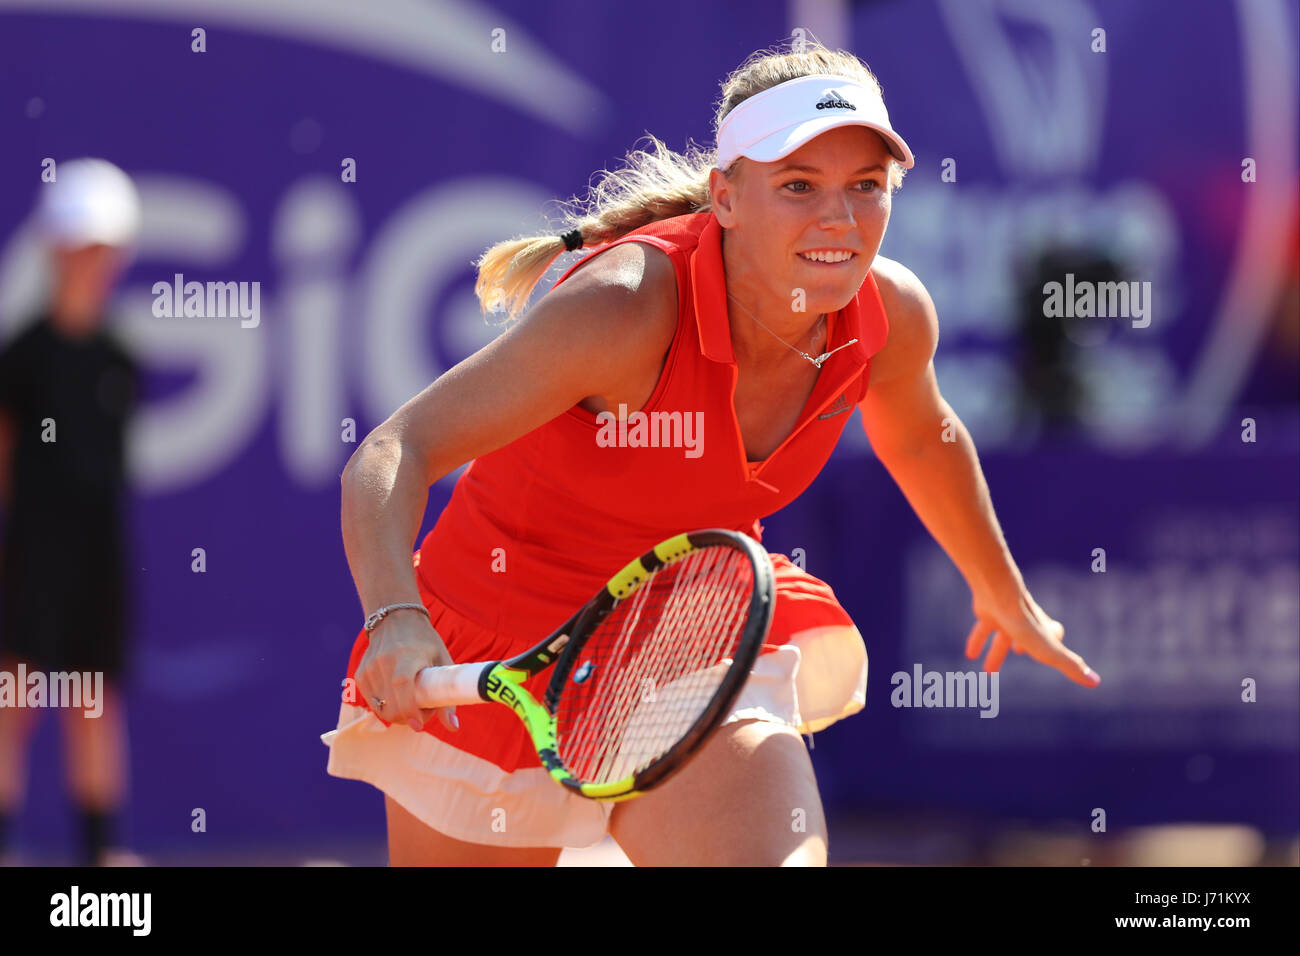 Strasbourg, France. 22nd May, 2017. Danish tennis player Caroline Wozniacki  is in action during her match in the 1st round of the WTA tennis  Internationaux of Strasbourg vs American player Shelby Rogers